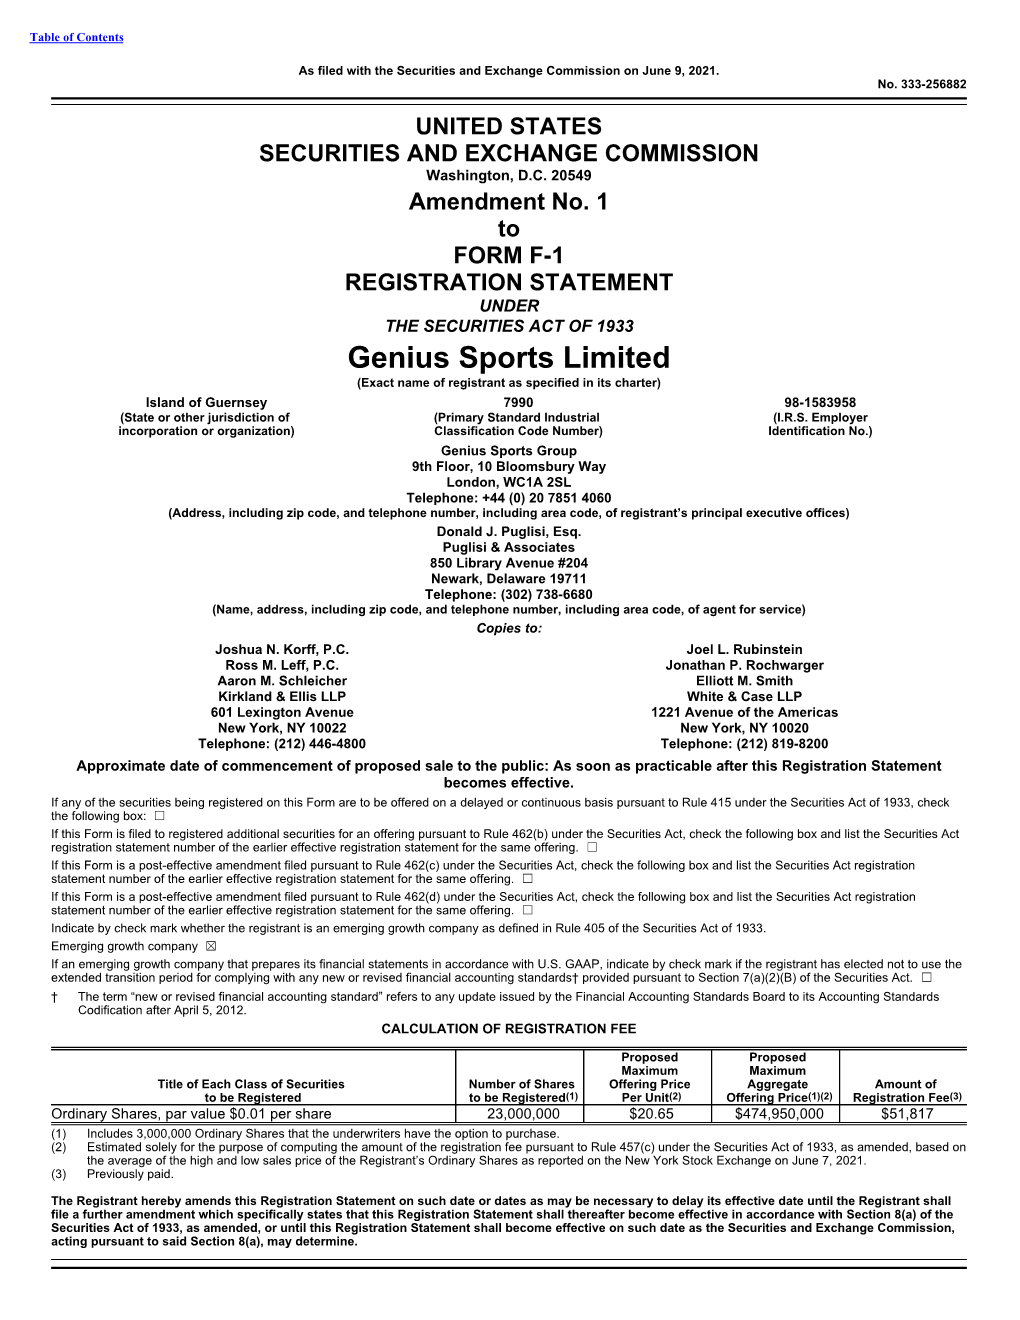 Genius Sports Limited (Exact Name of Registrant As Specified in Its Charter)